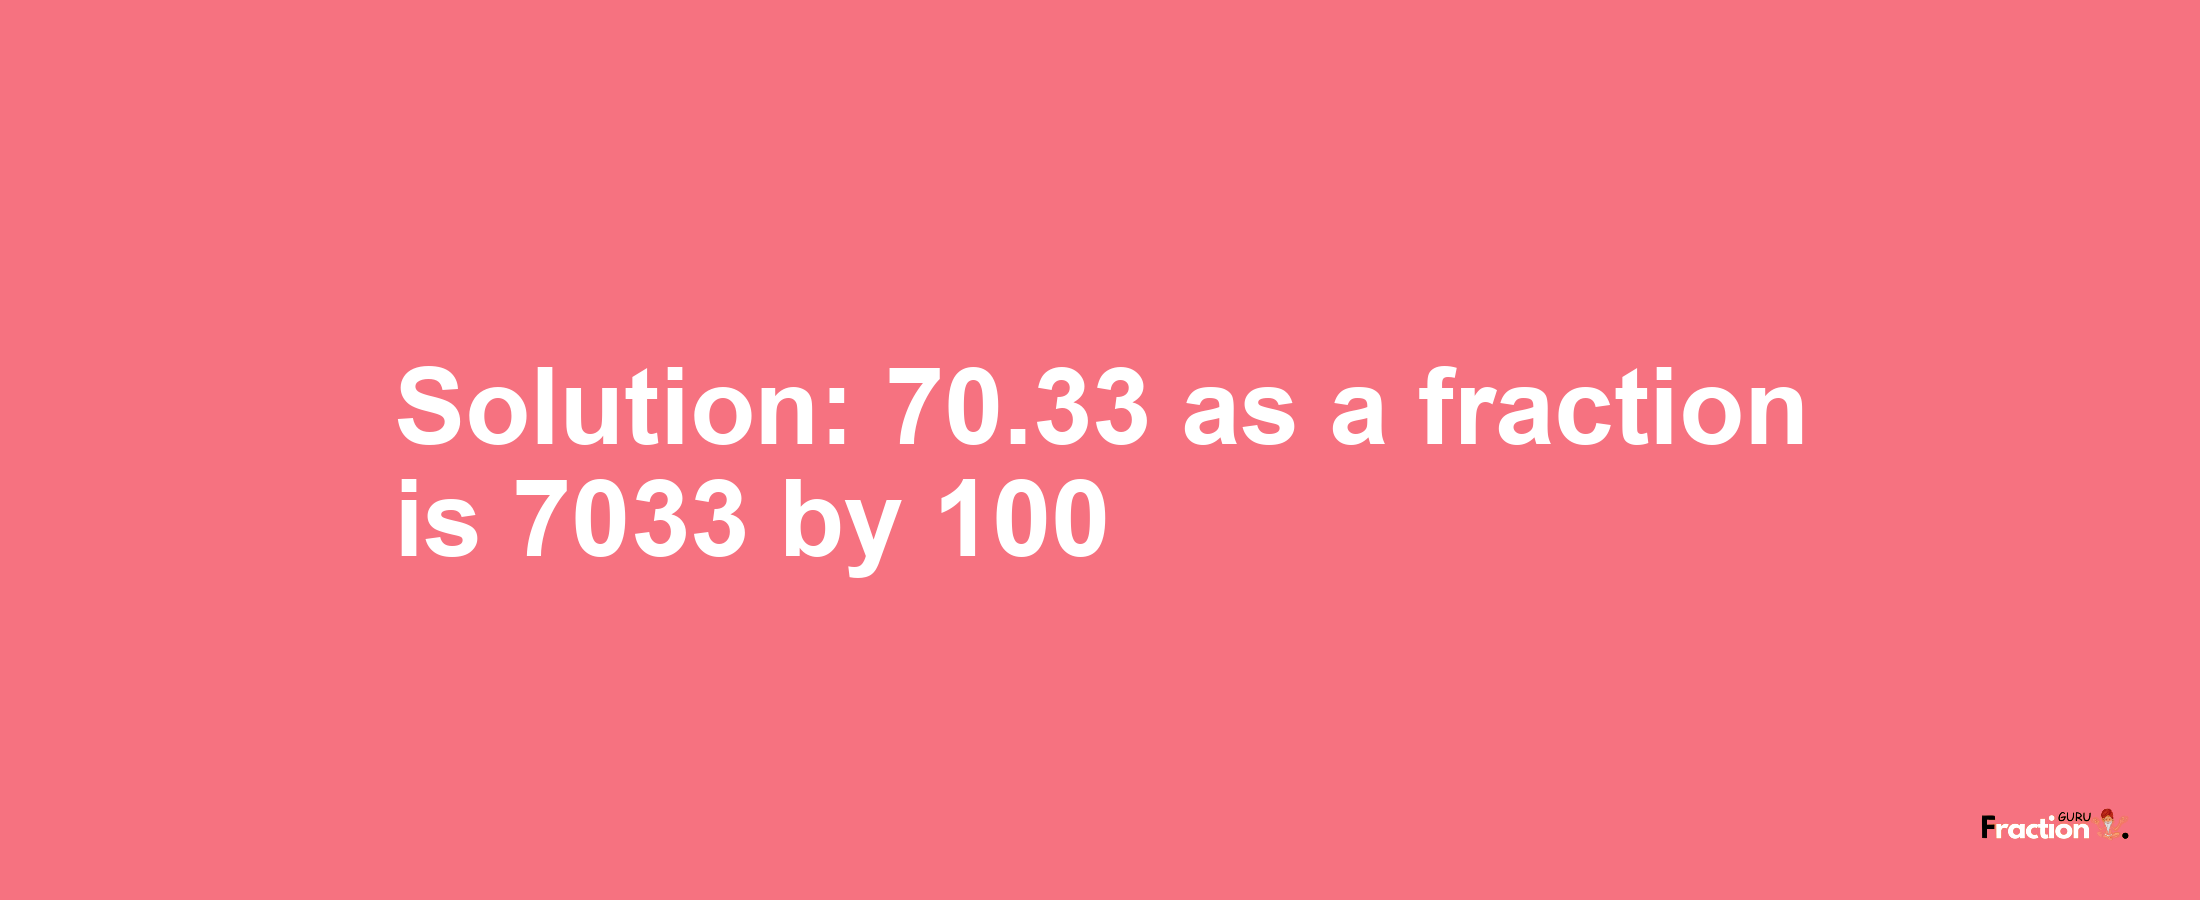 Solution:70.33 as a fraction is 7033/100